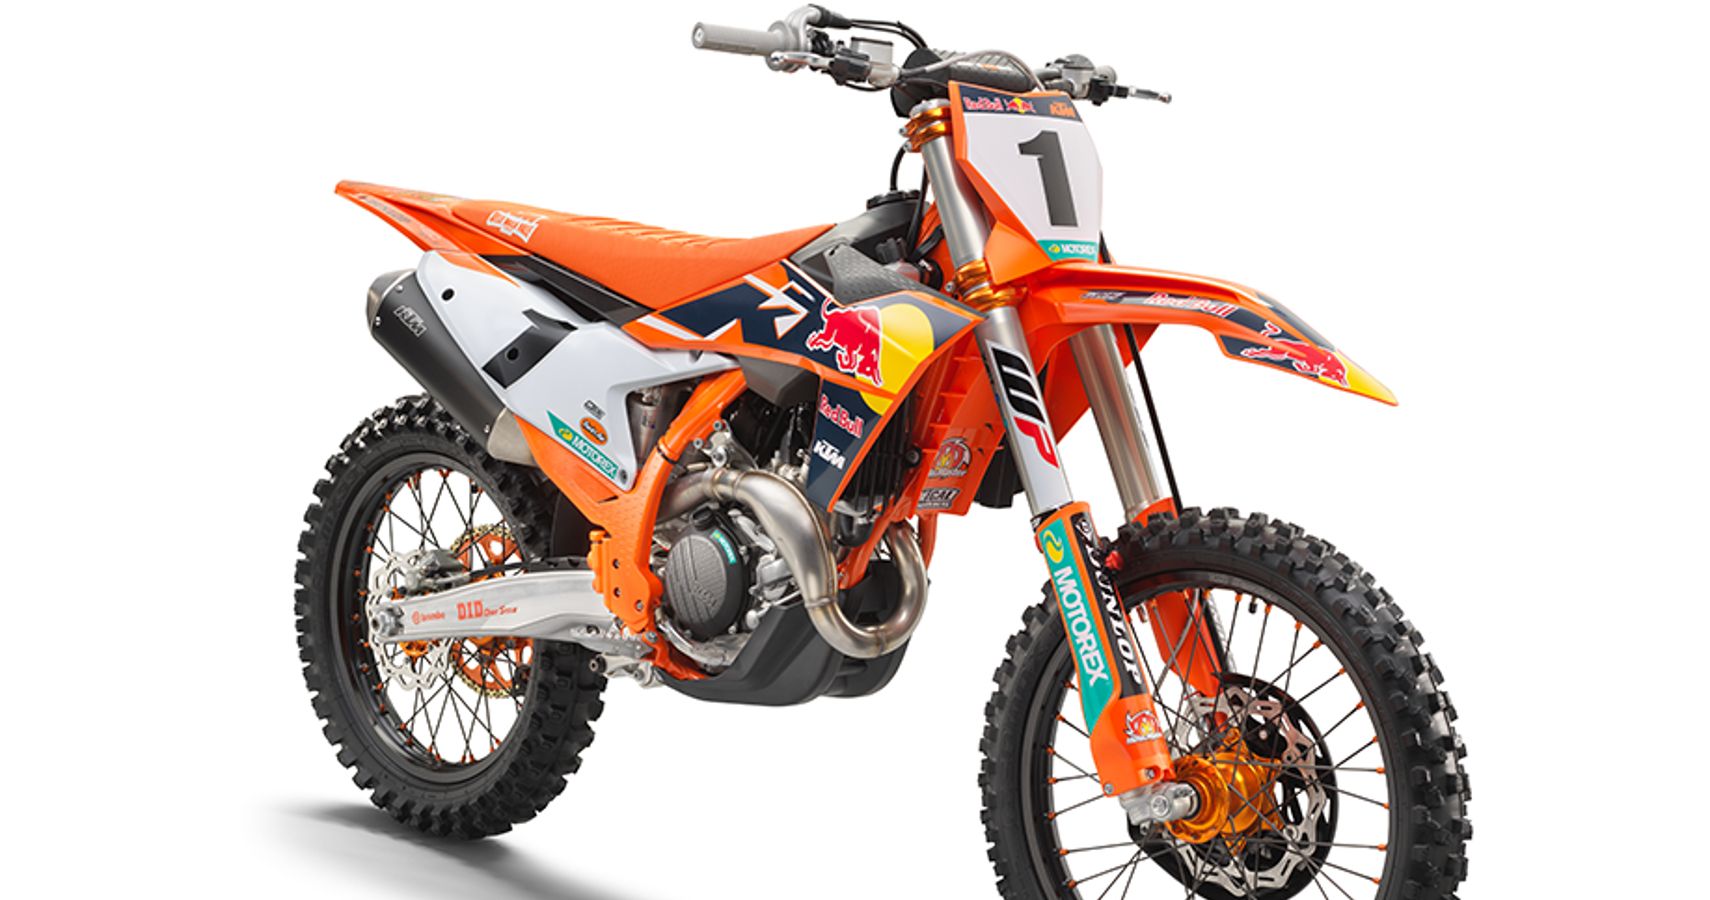 Check Out The 2022 KTM 450 SX-F Factory Edition